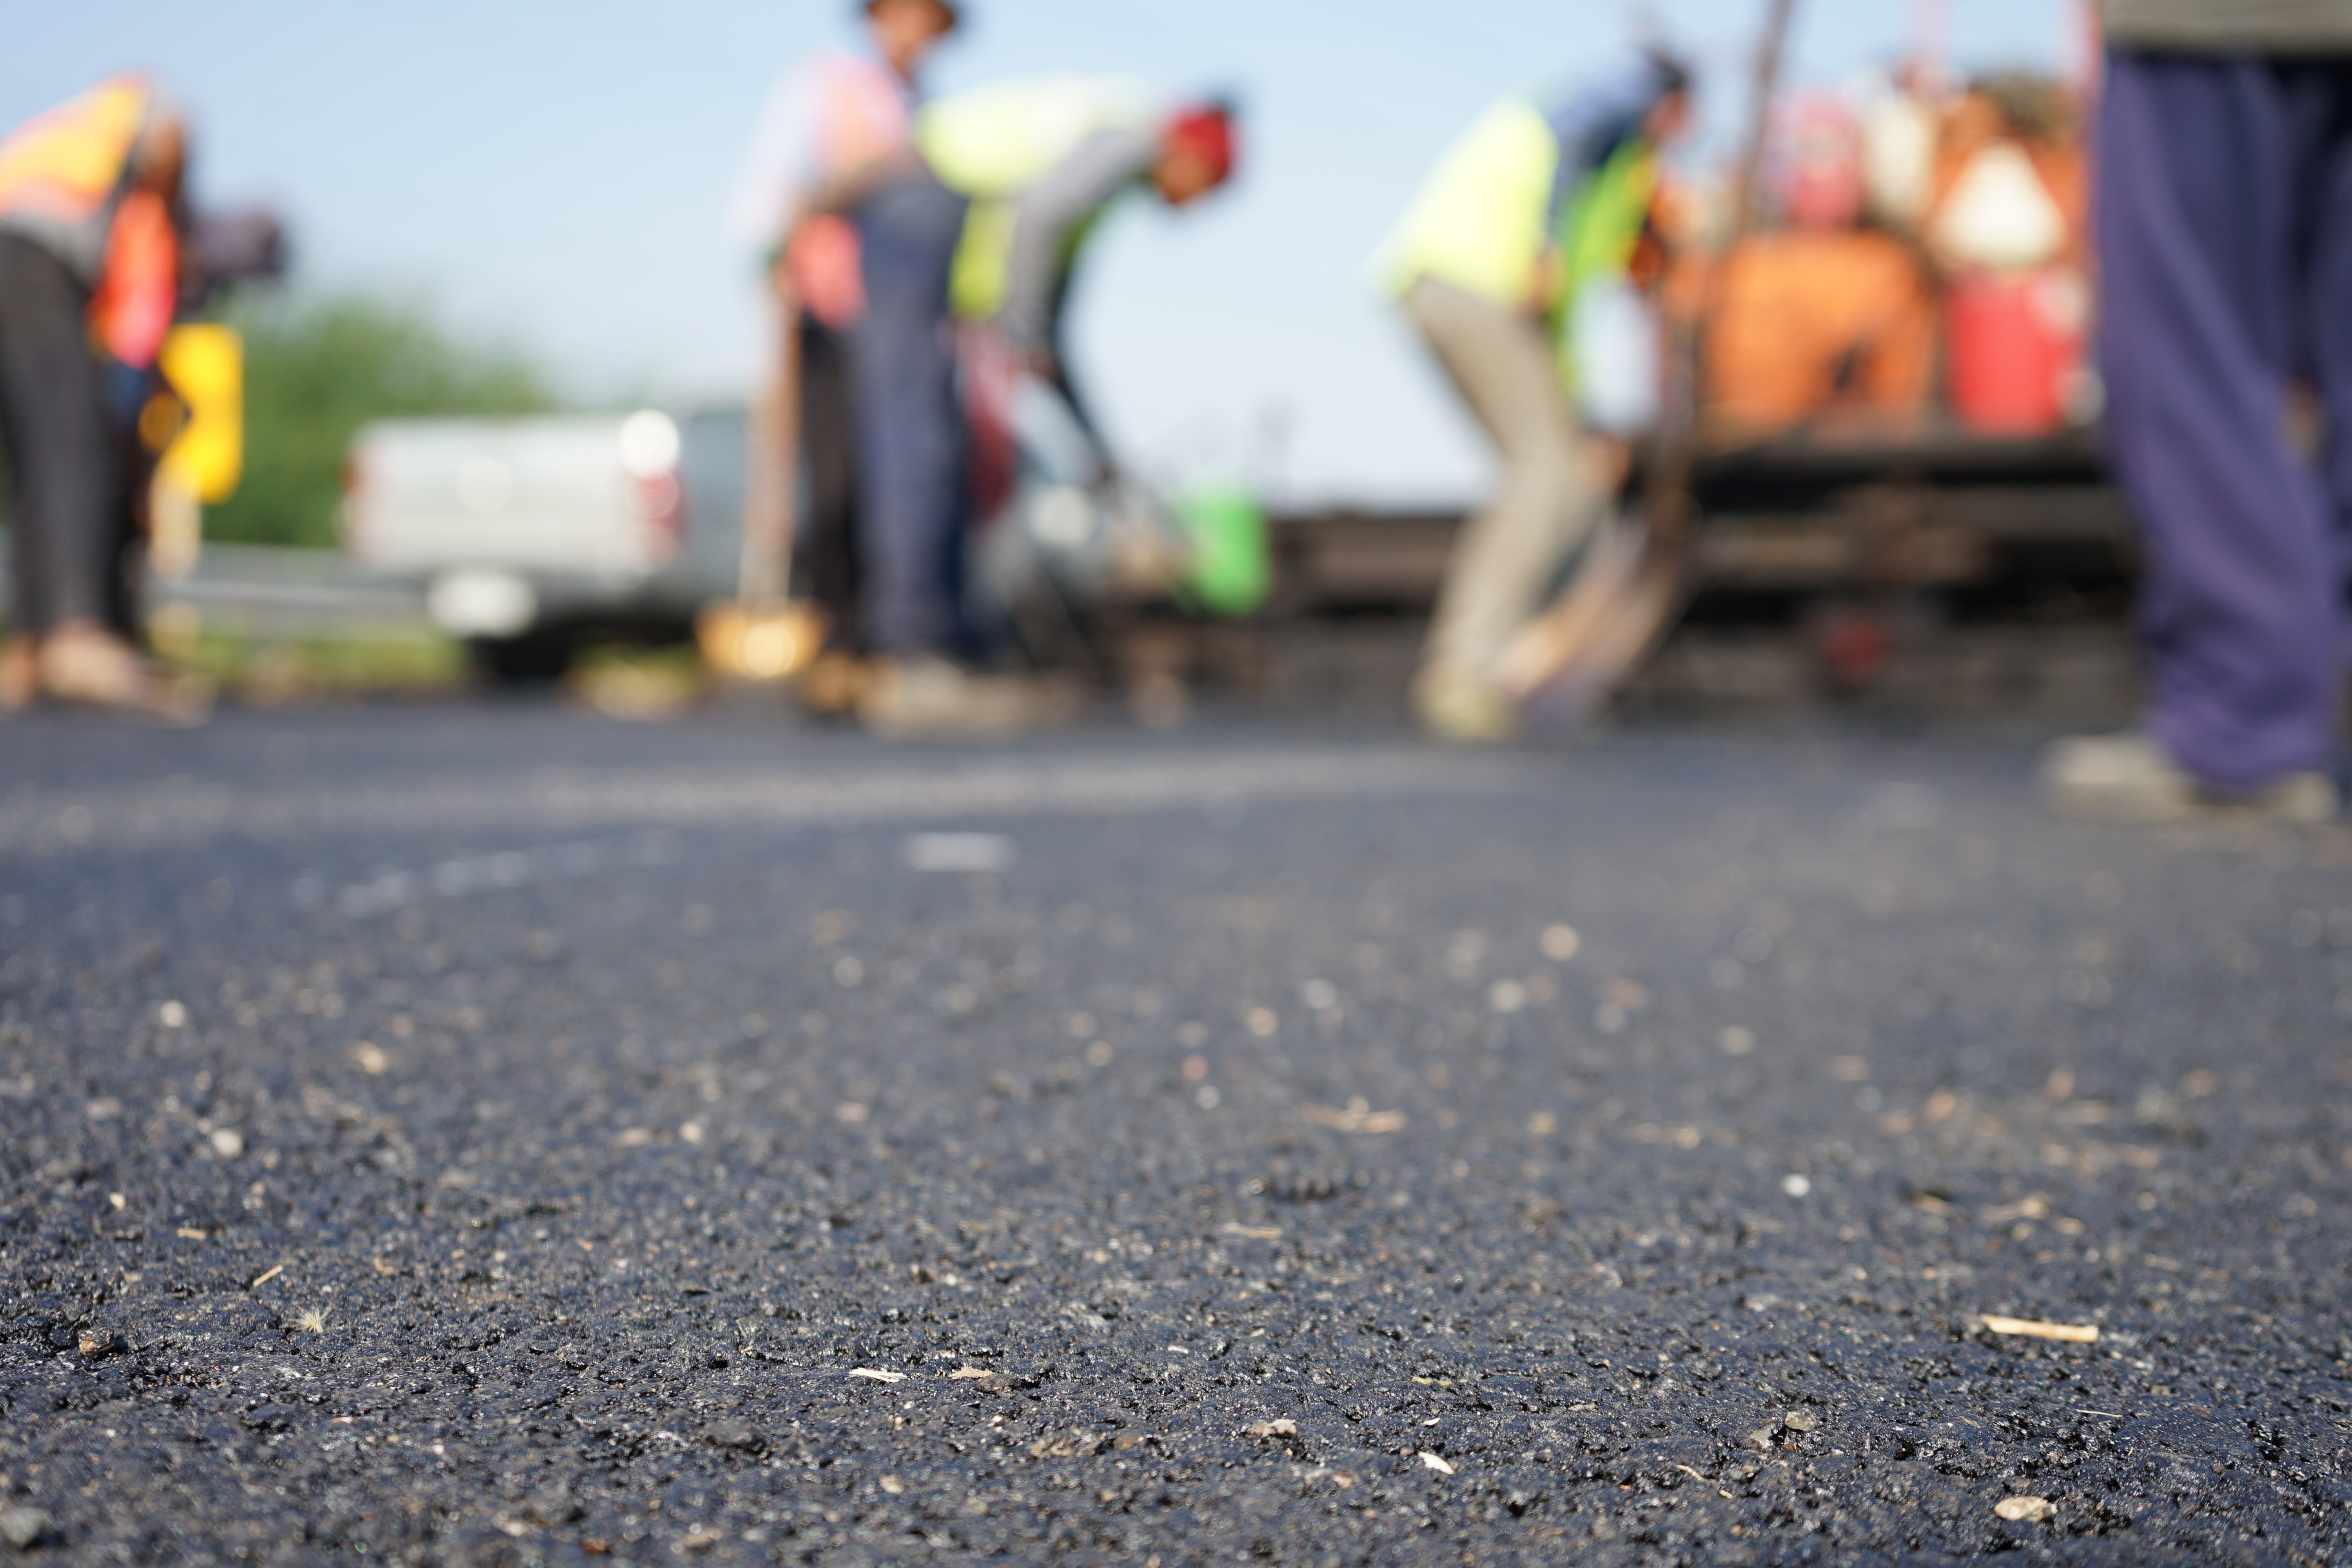 Out-of-focus construction workers working on a paved roadway.